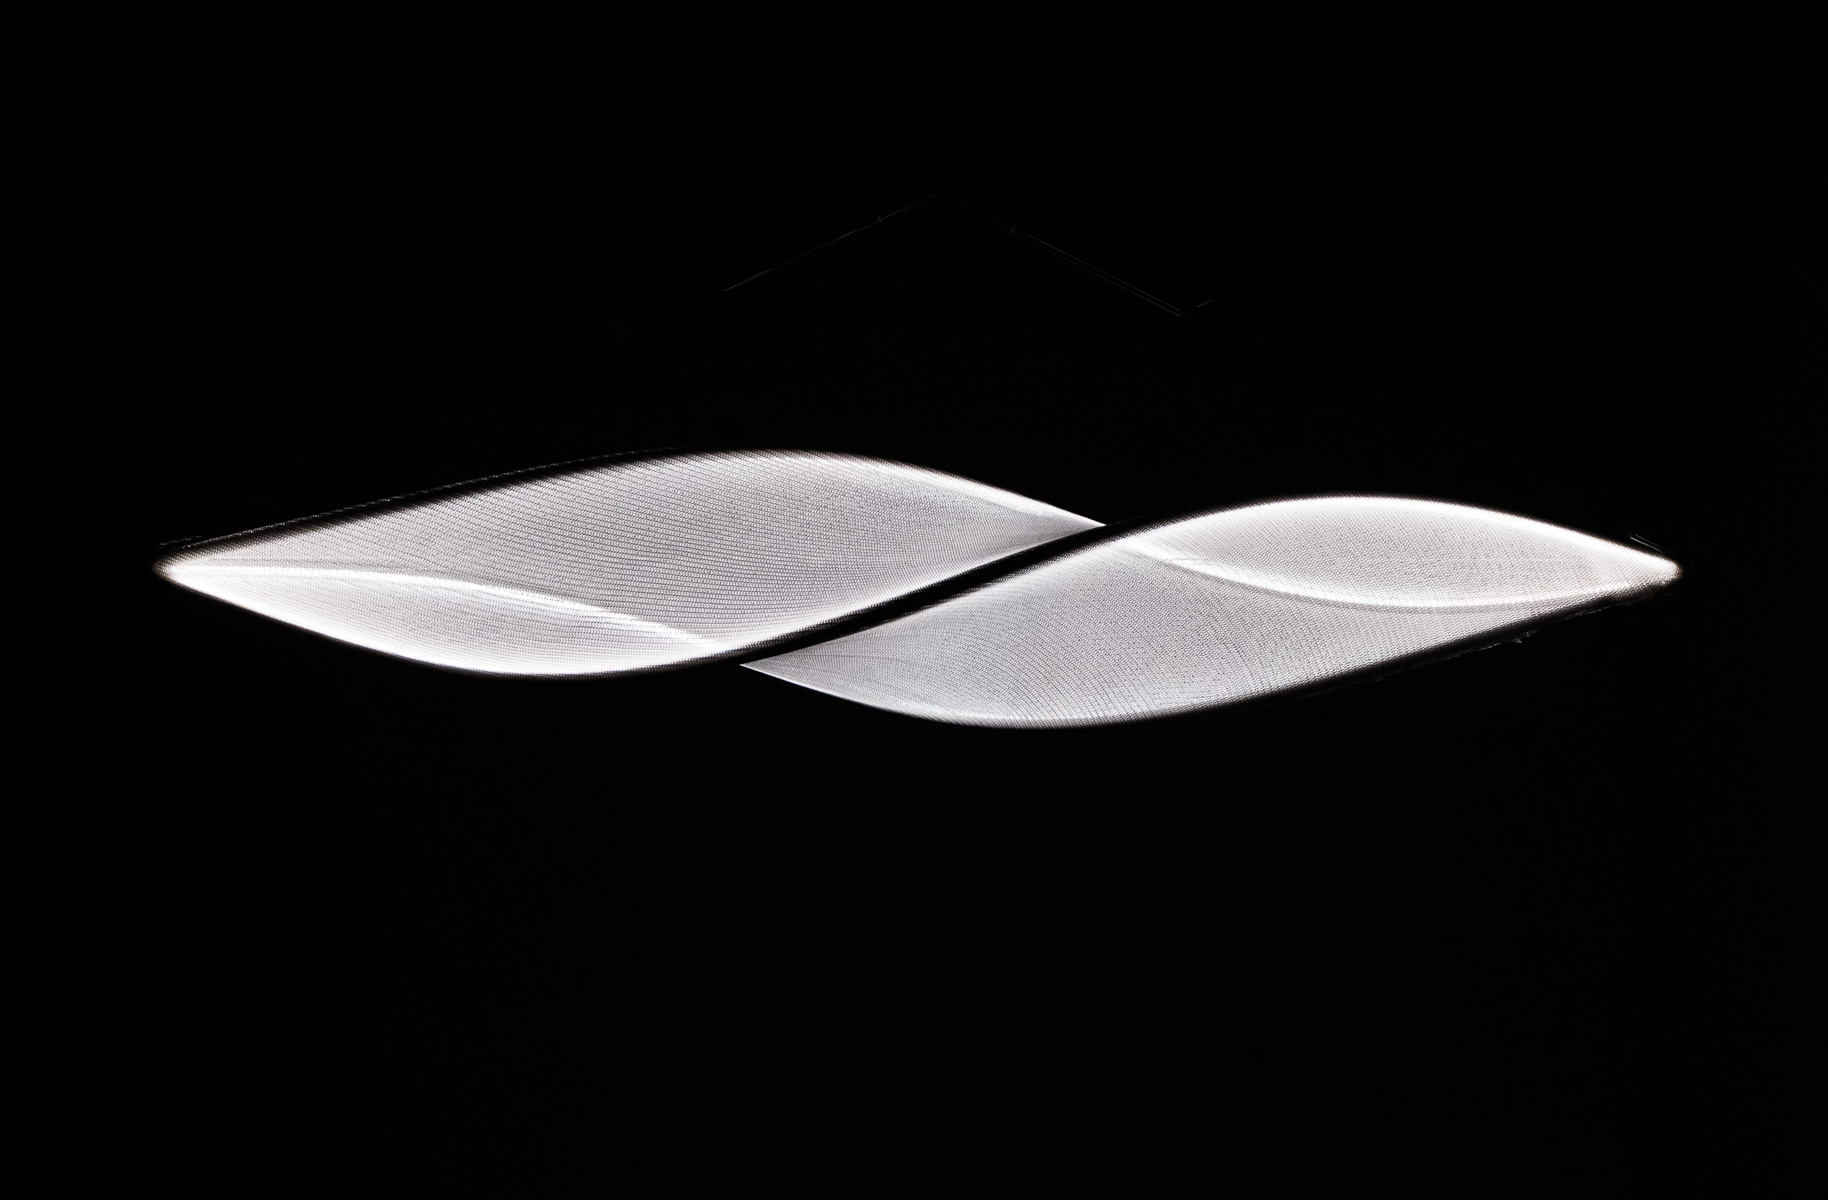 llll.08 sculptural led light standing lamp, suspended vertically or  horizontally